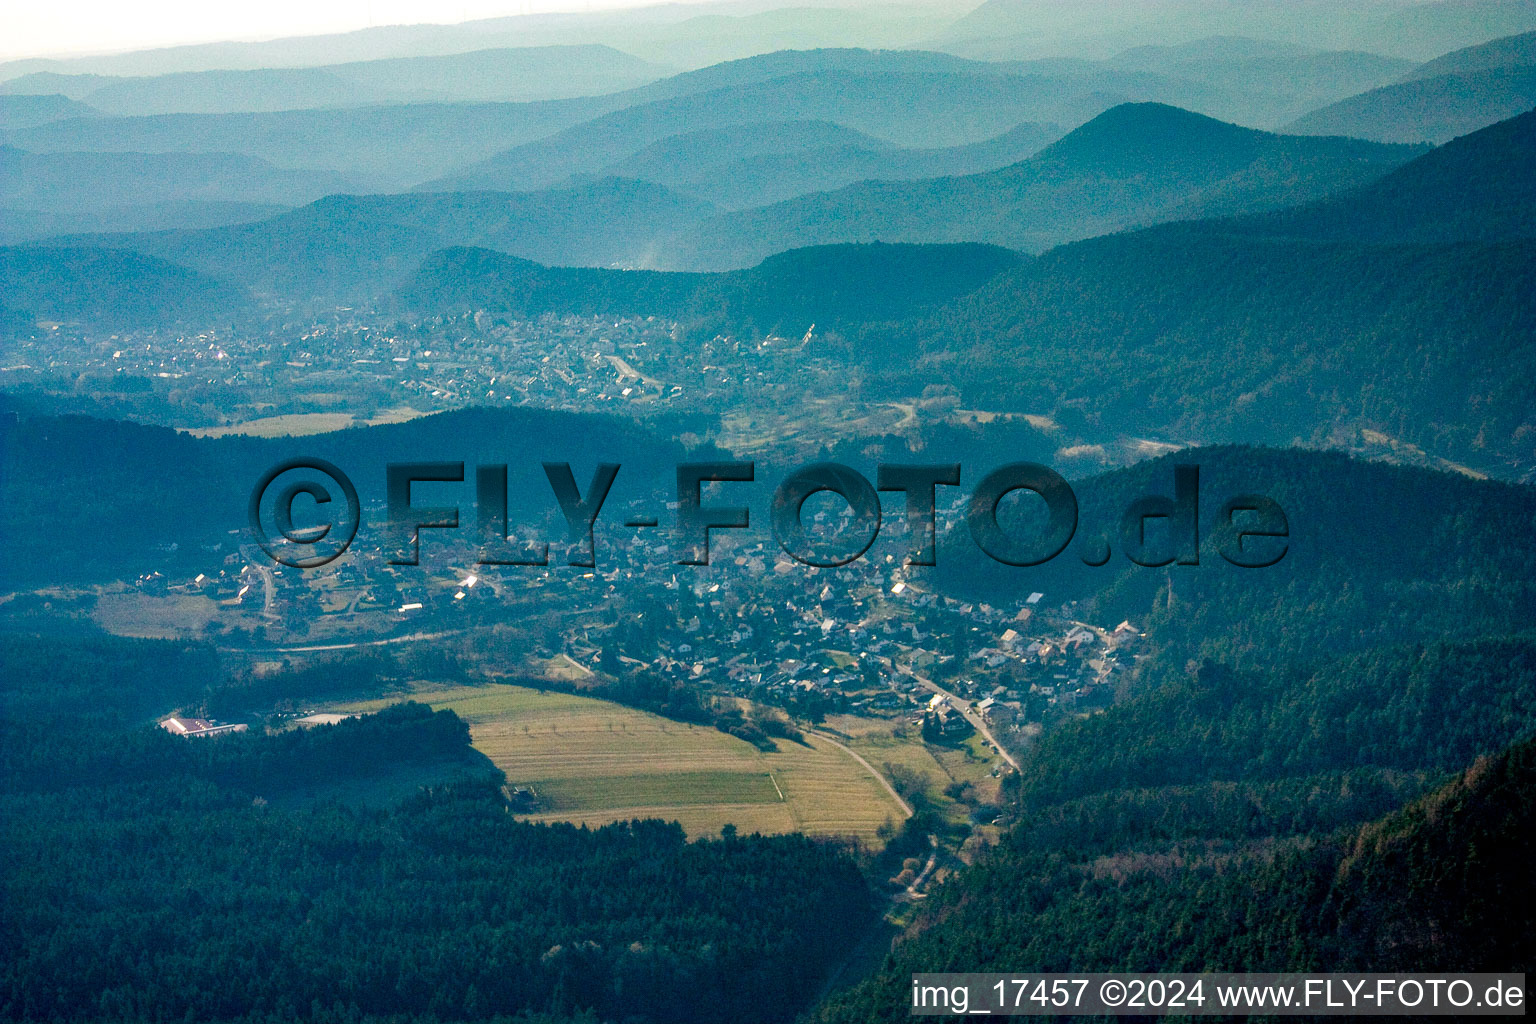 Erfweiler in the state Rhineland-Palatinate, Germany seen from above